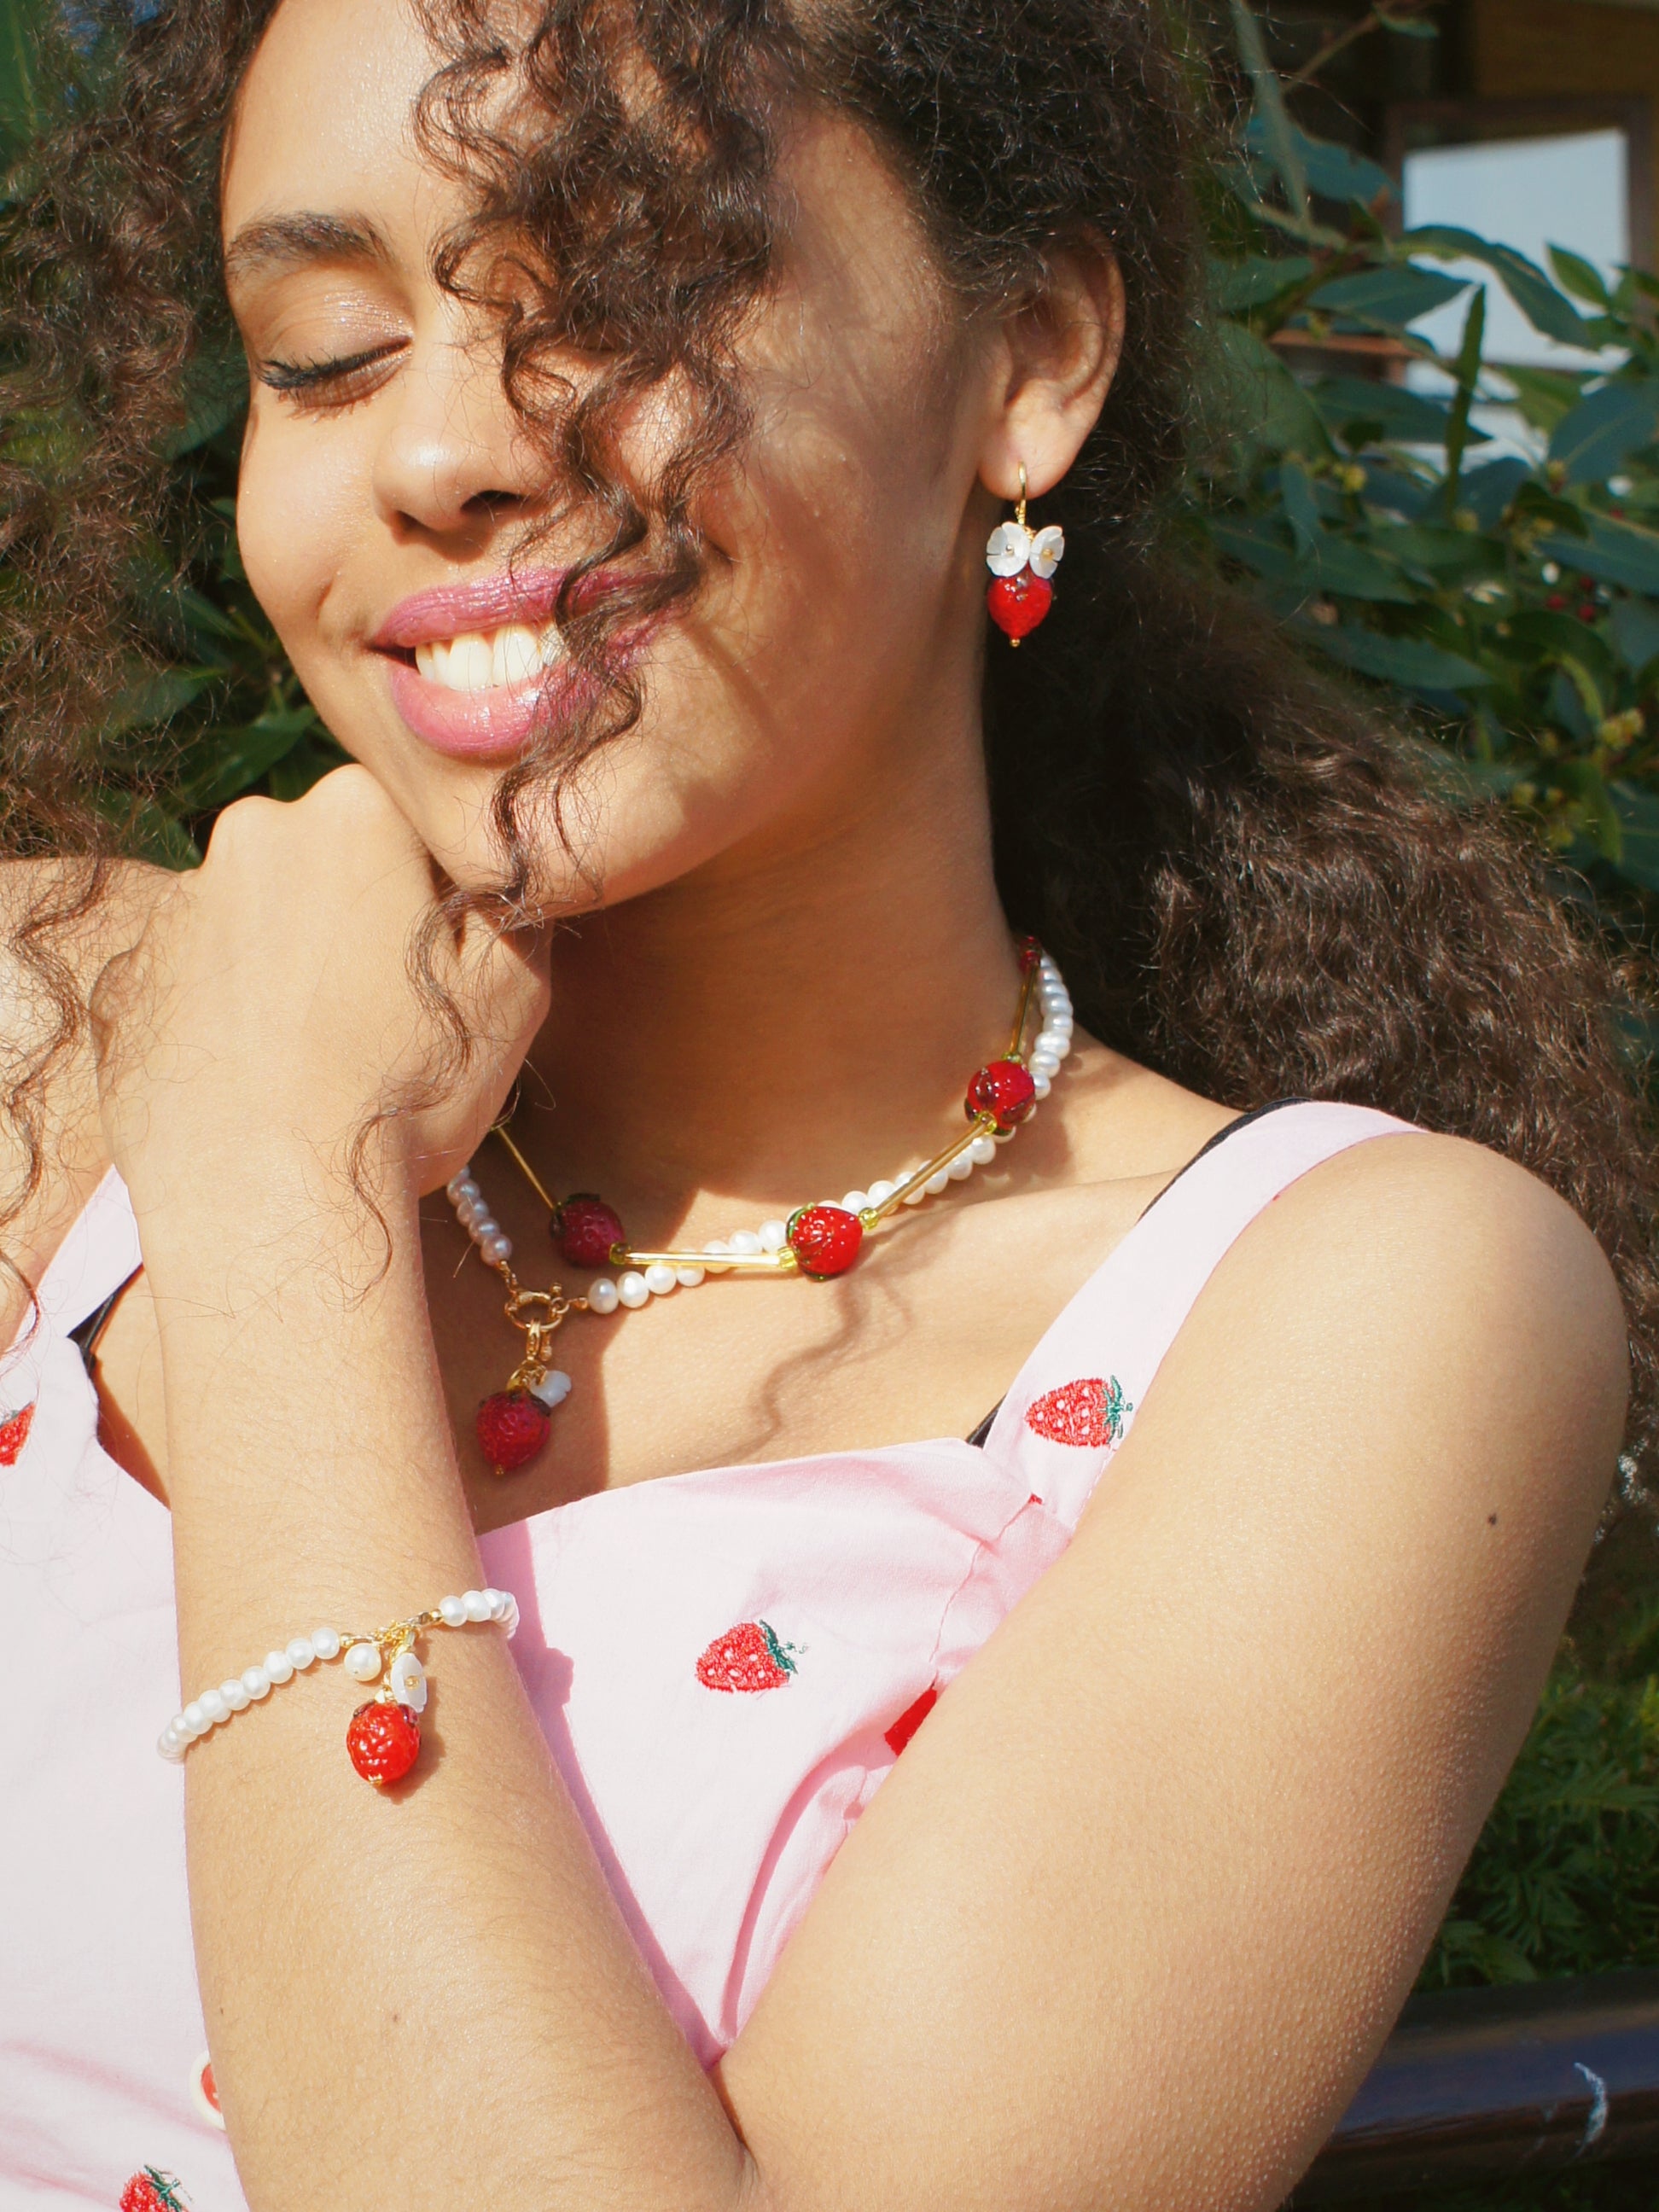 Strawberry and Flower Freshwater Pearl Bracelet